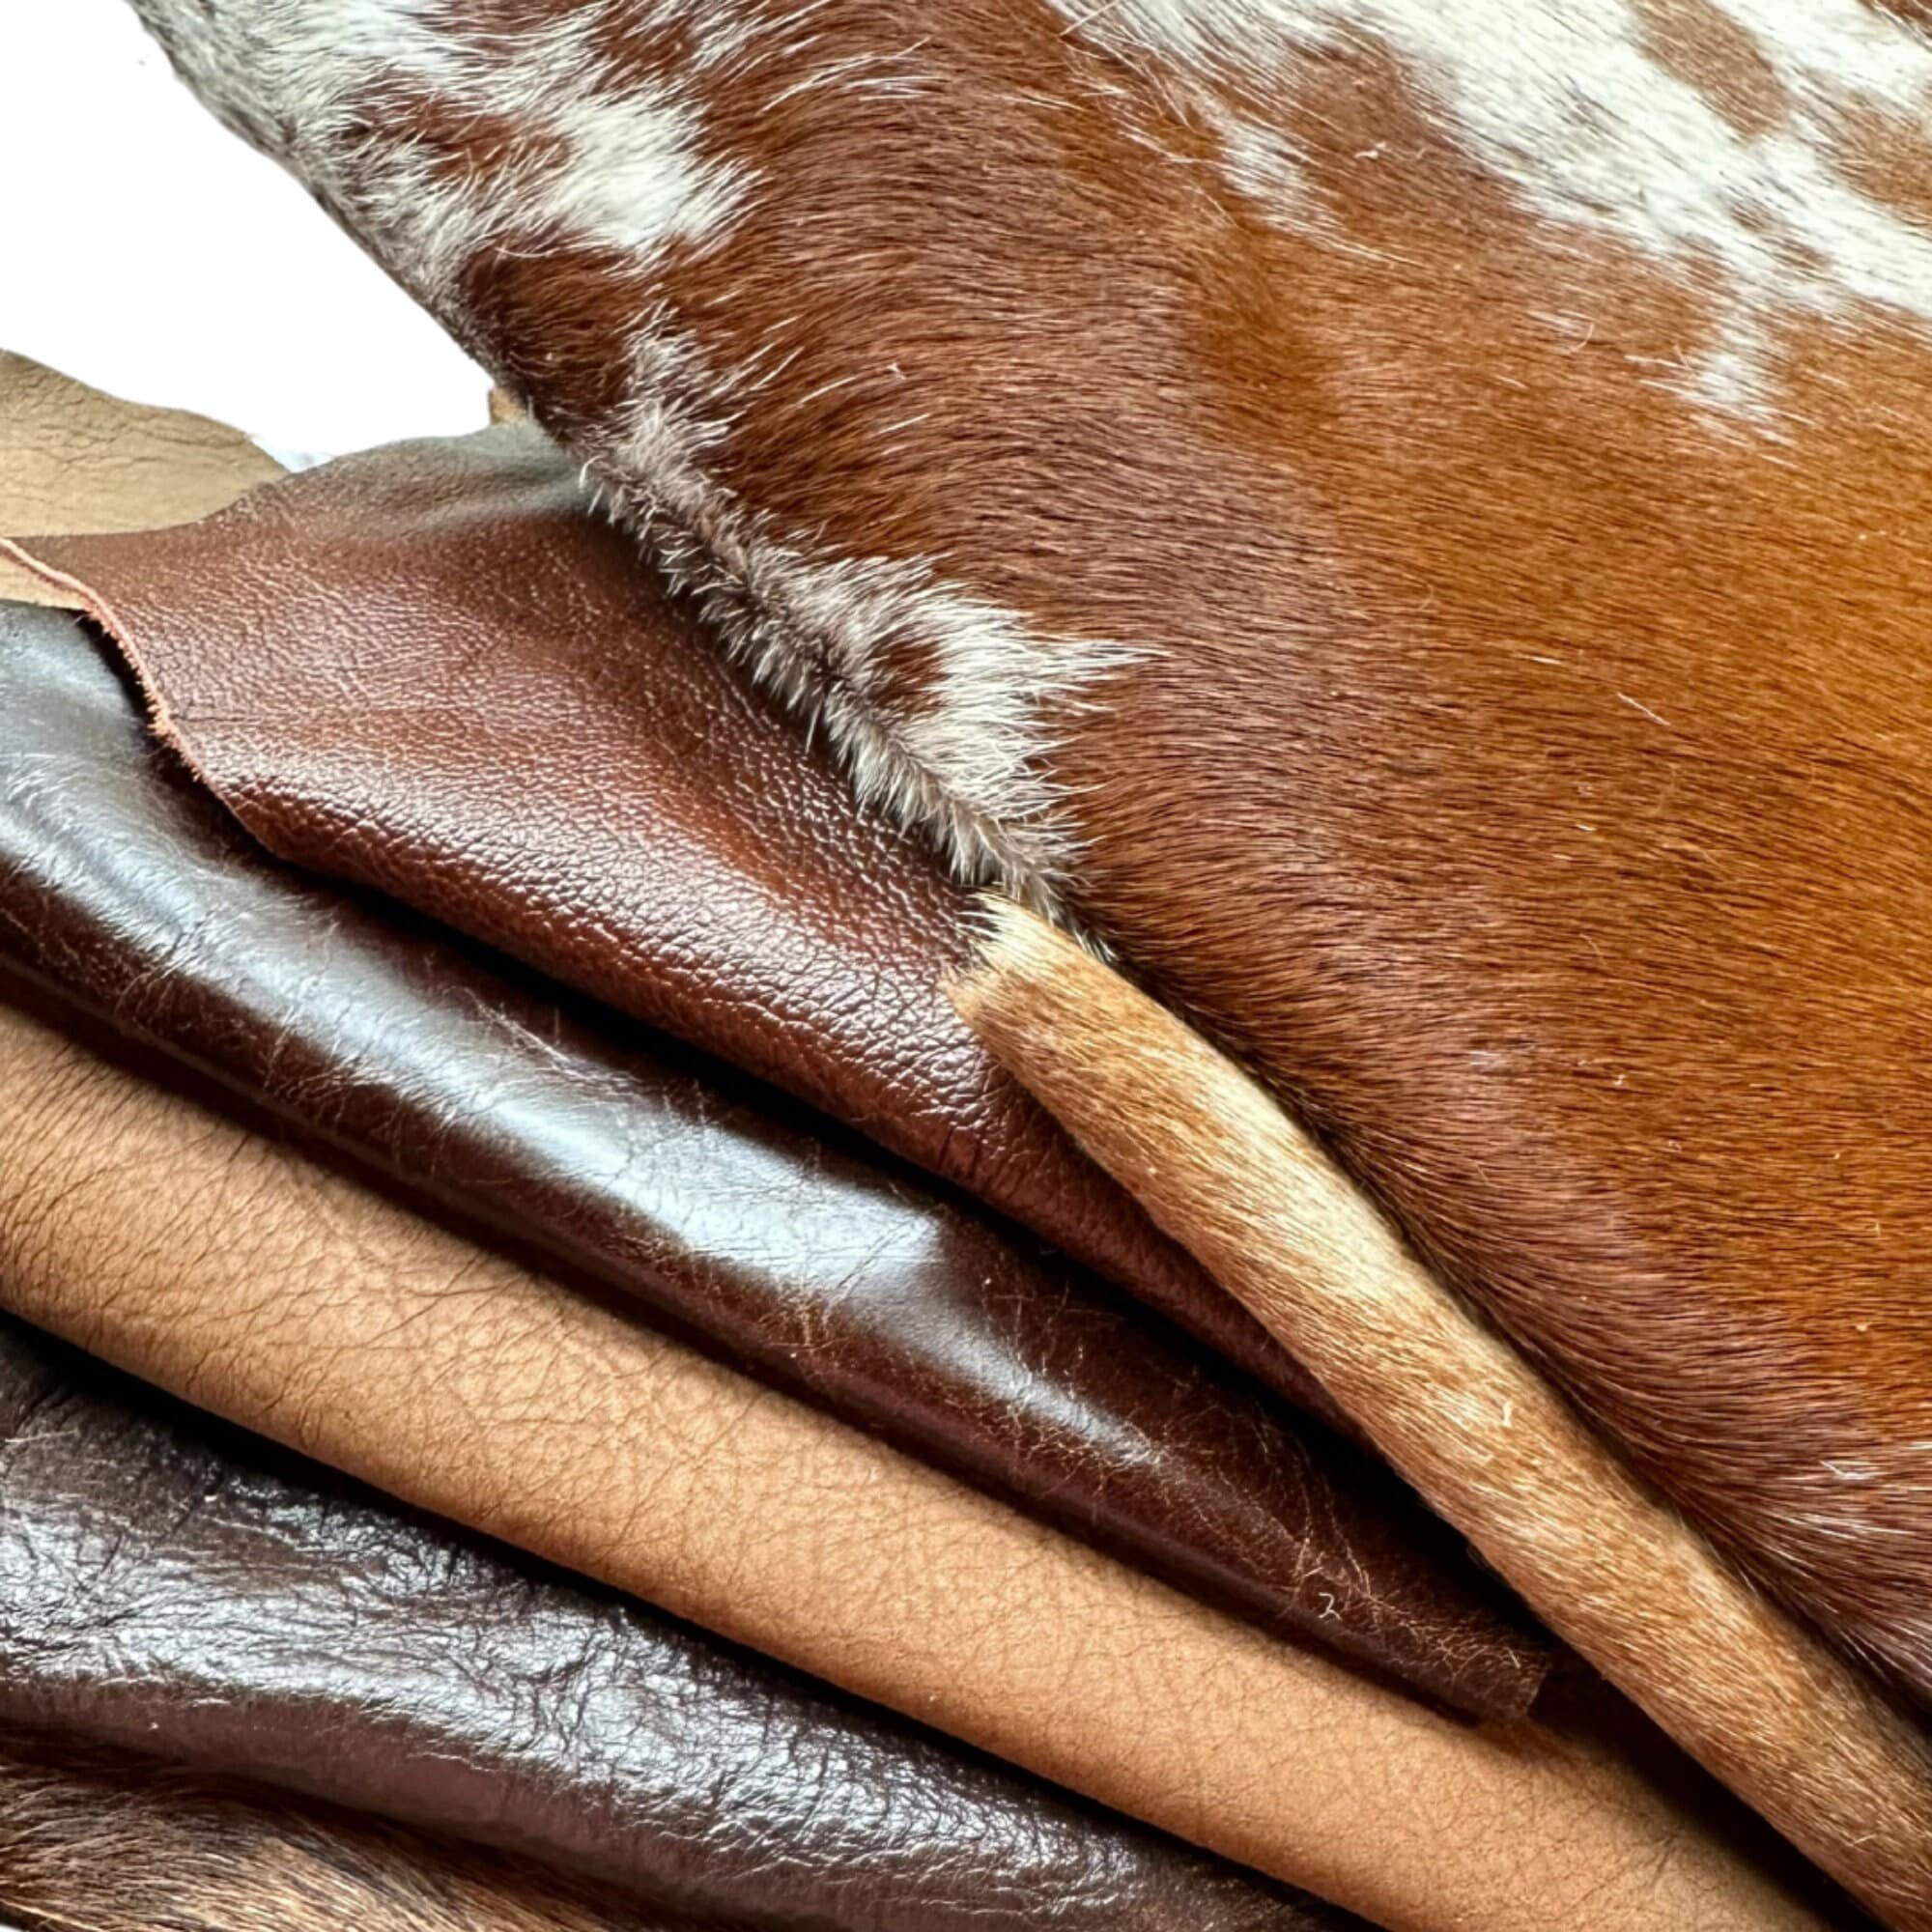 Genuine Leather / Upholstery Scraps / Recycle / Upcycle / Cowhide